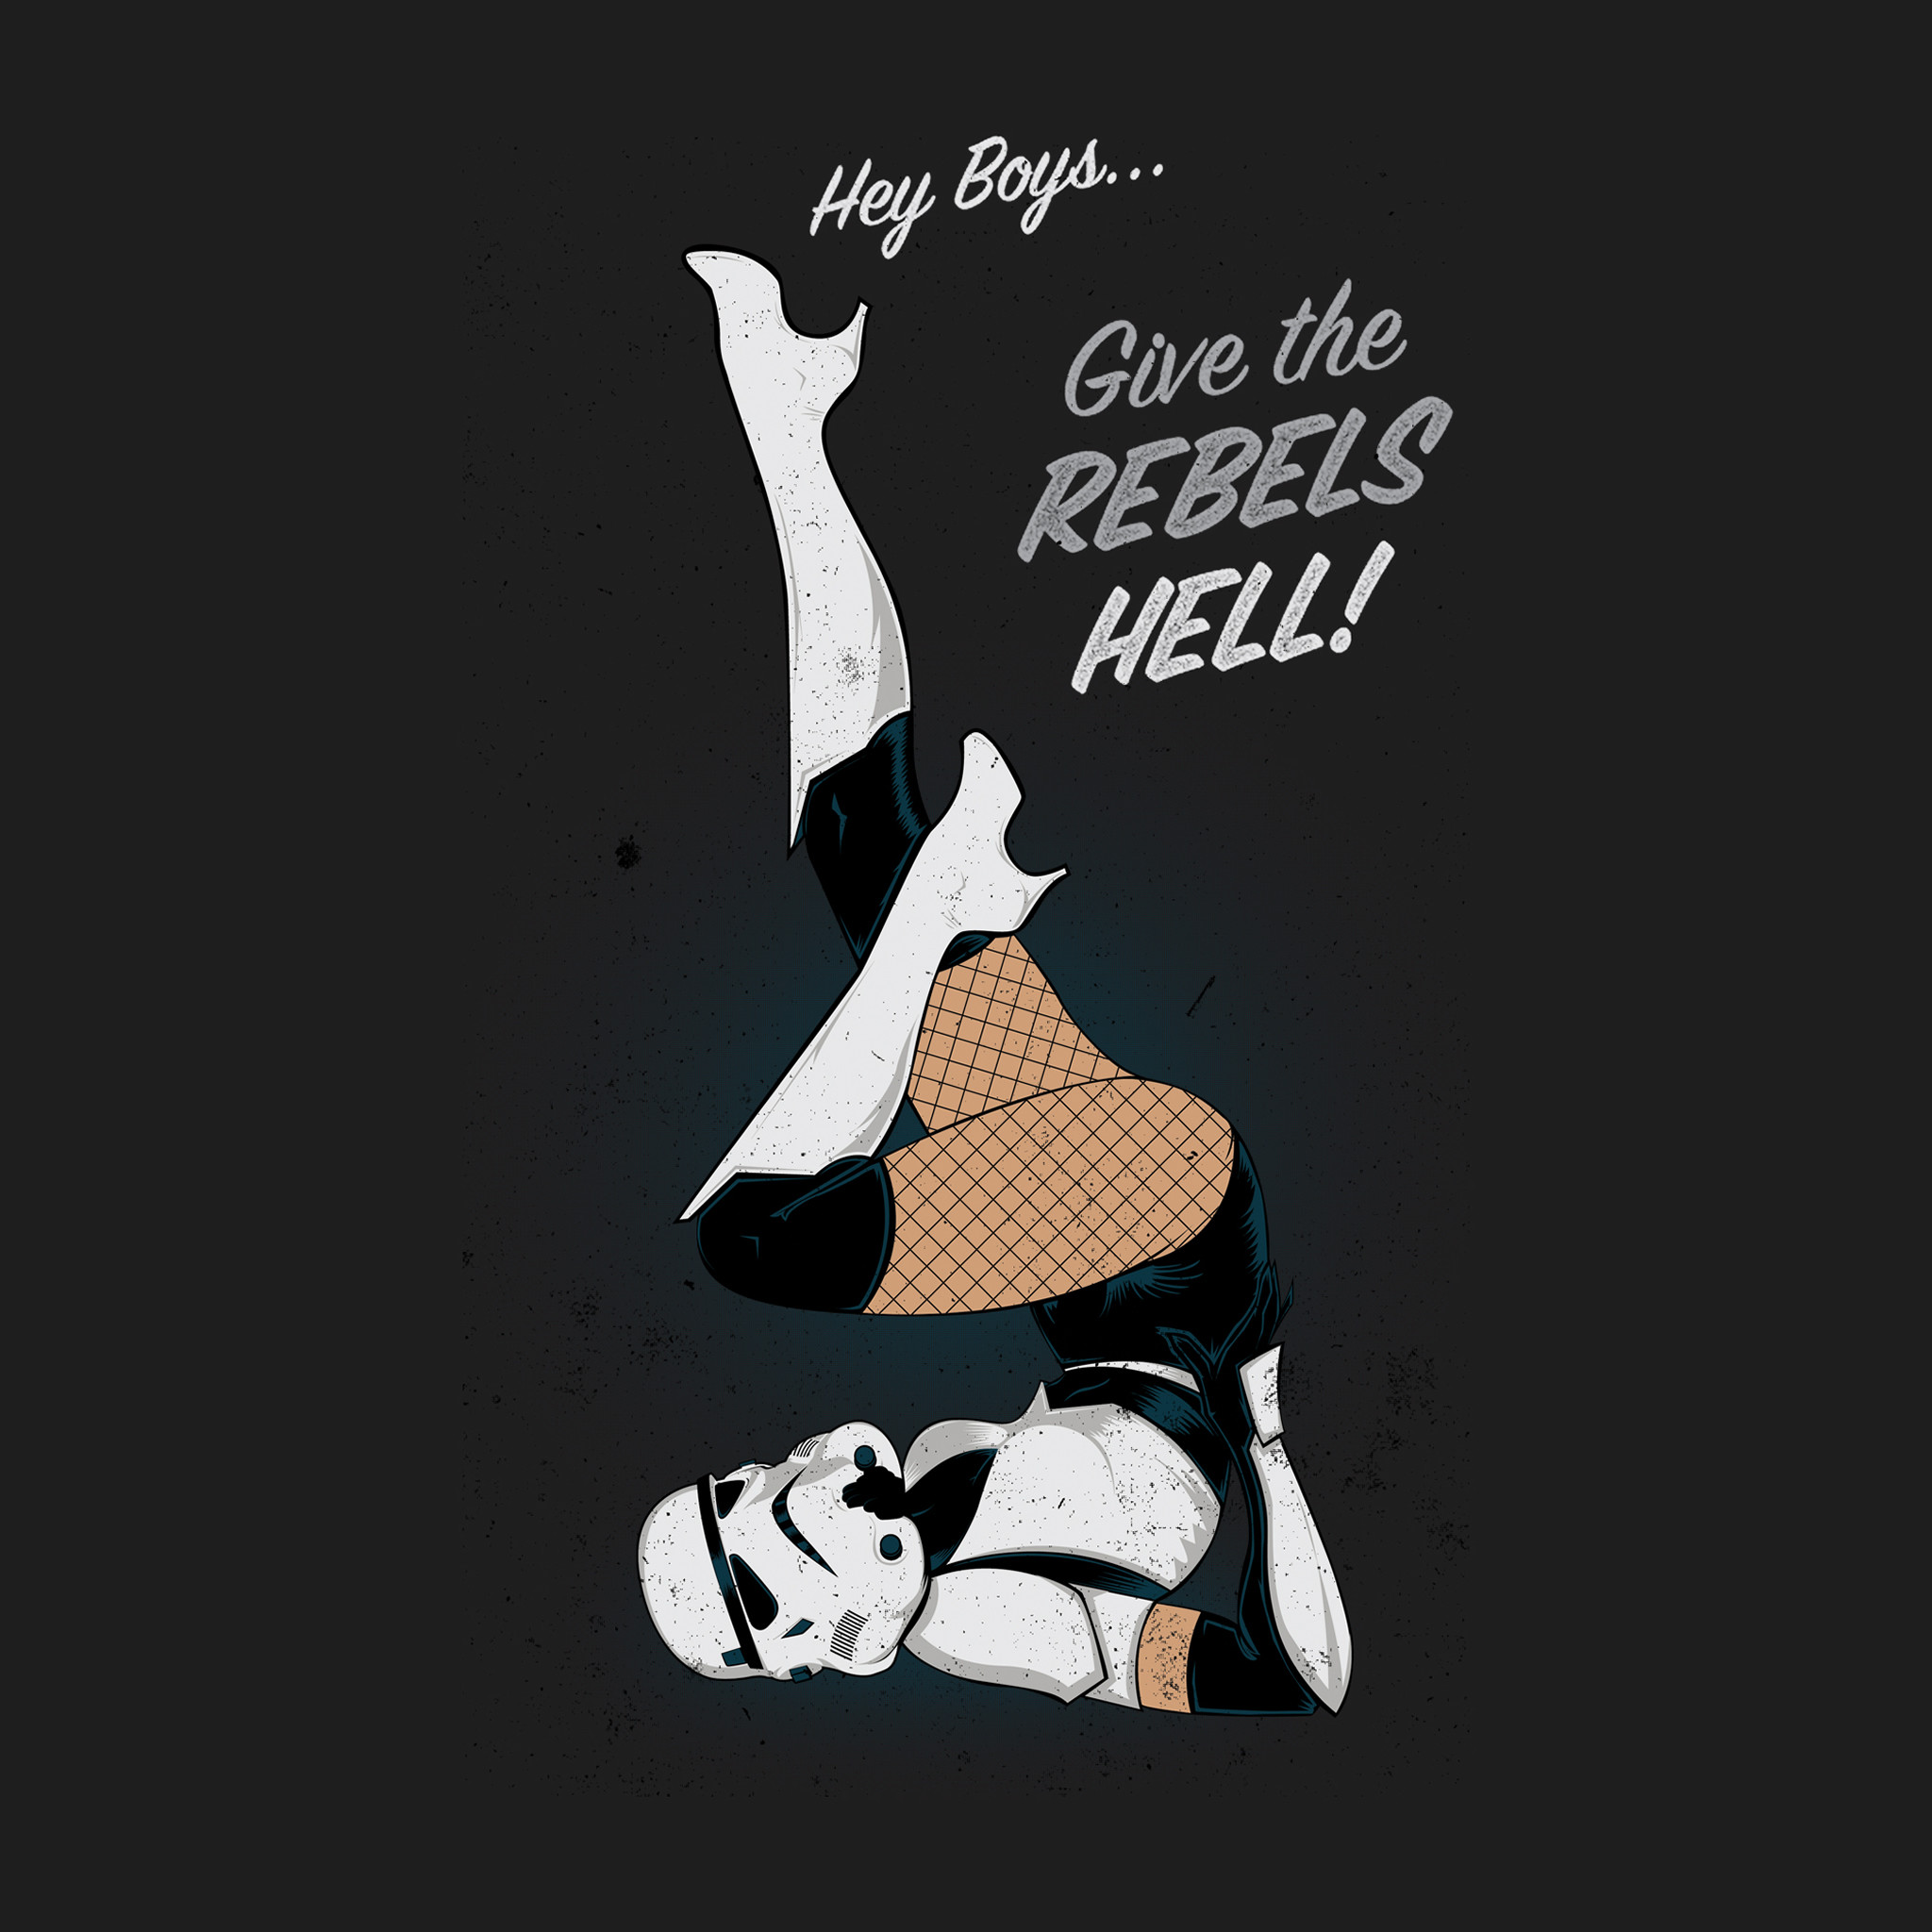 Stormtrooper Pin Up Girl Style iPad Air Wallpaper Download iPhone